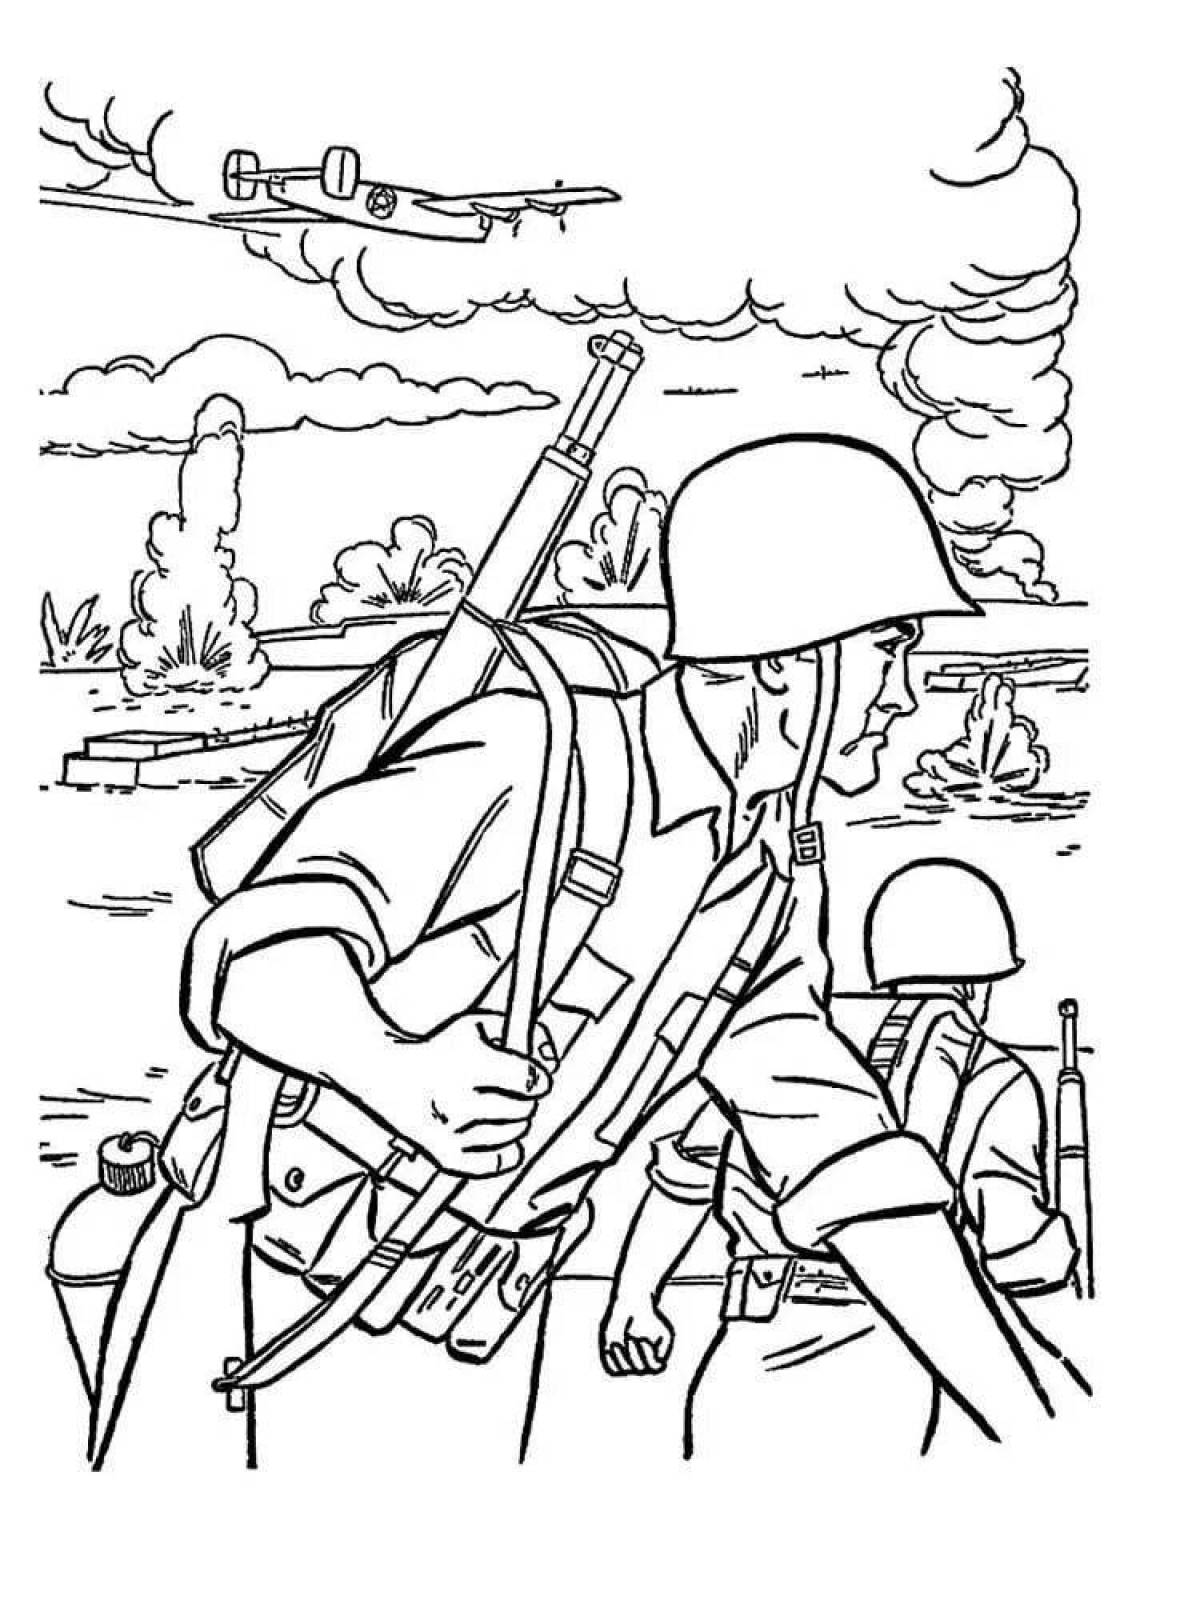 Prosperous defenders of the fatherland coloring page